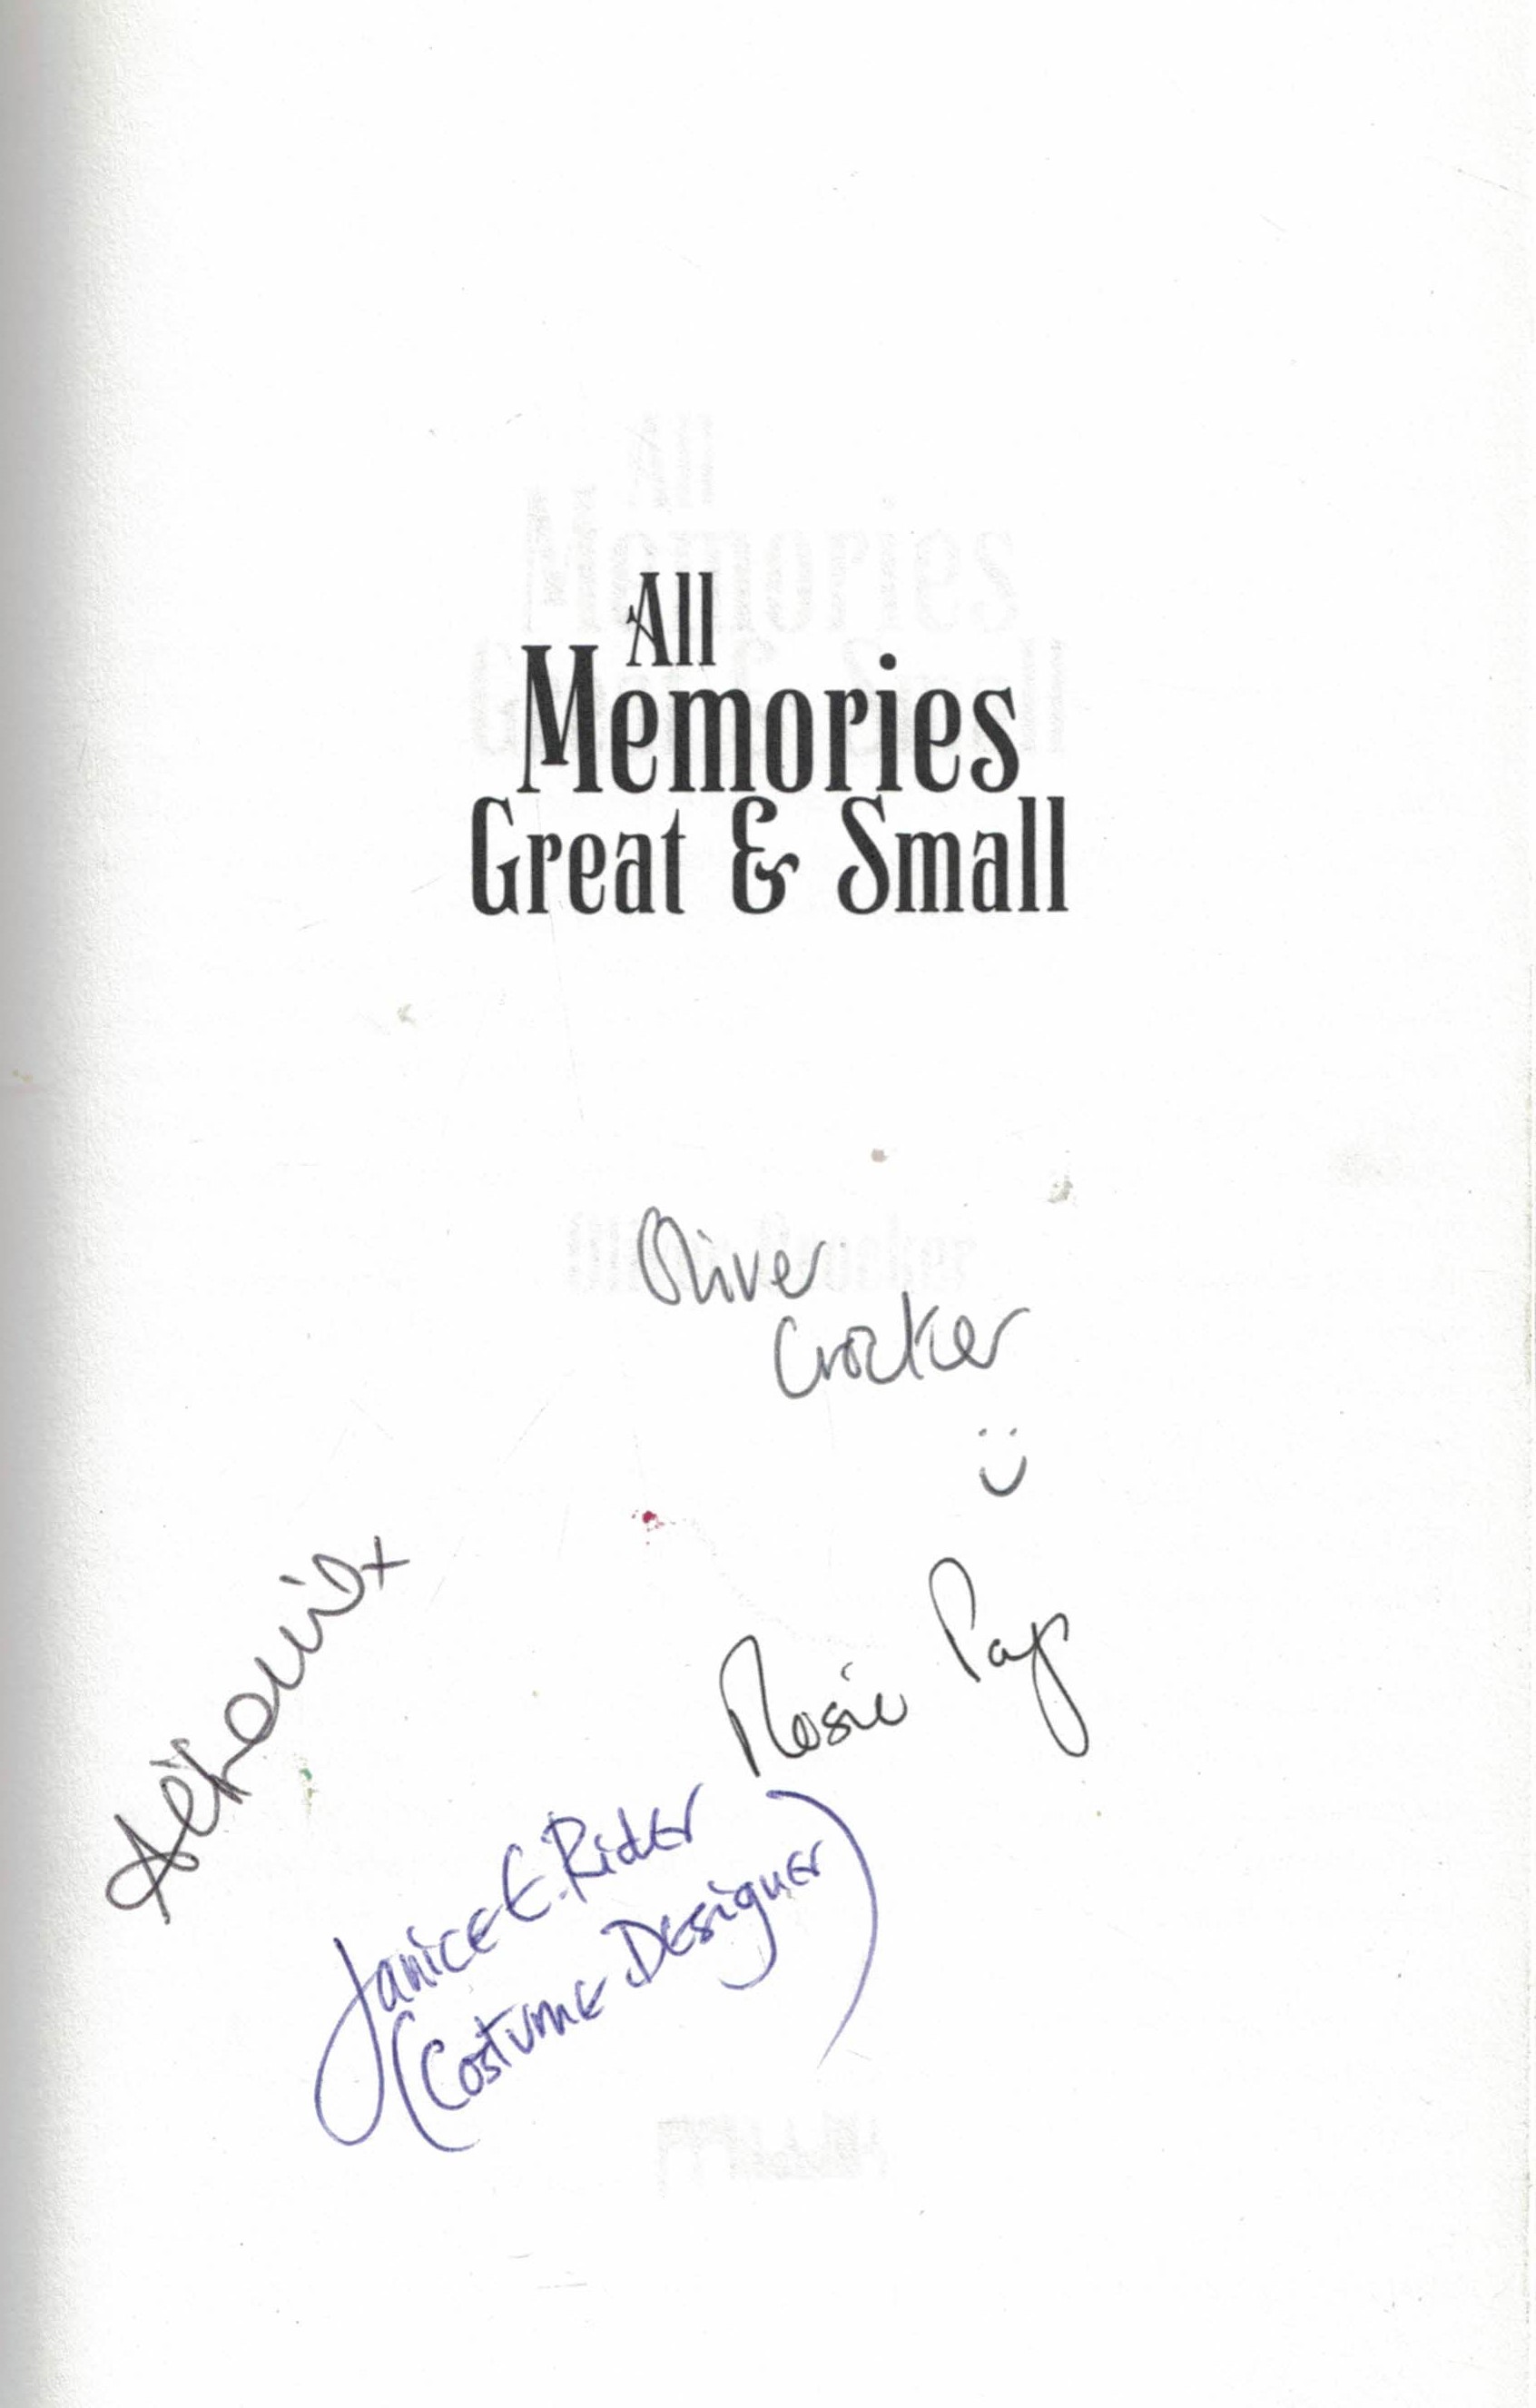 All Memories Great & Small. Signed copy.